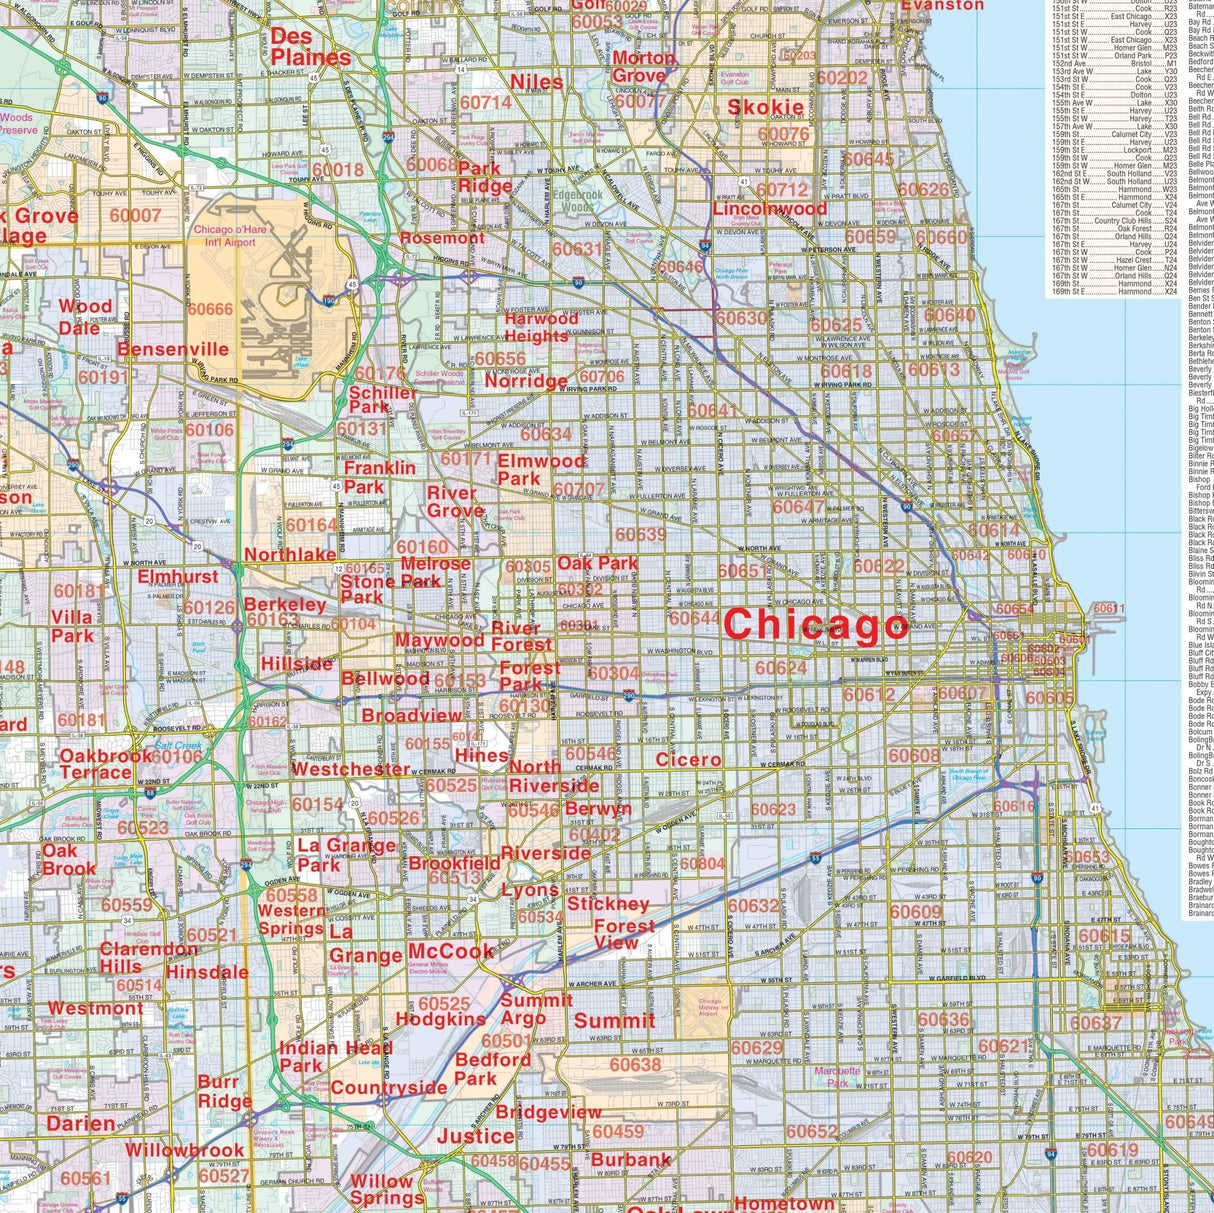 Chicago, IL Vicinity Wall Map - KA-C-IL-CHICAGOVICINITY-PAPER - Ultimate Globes